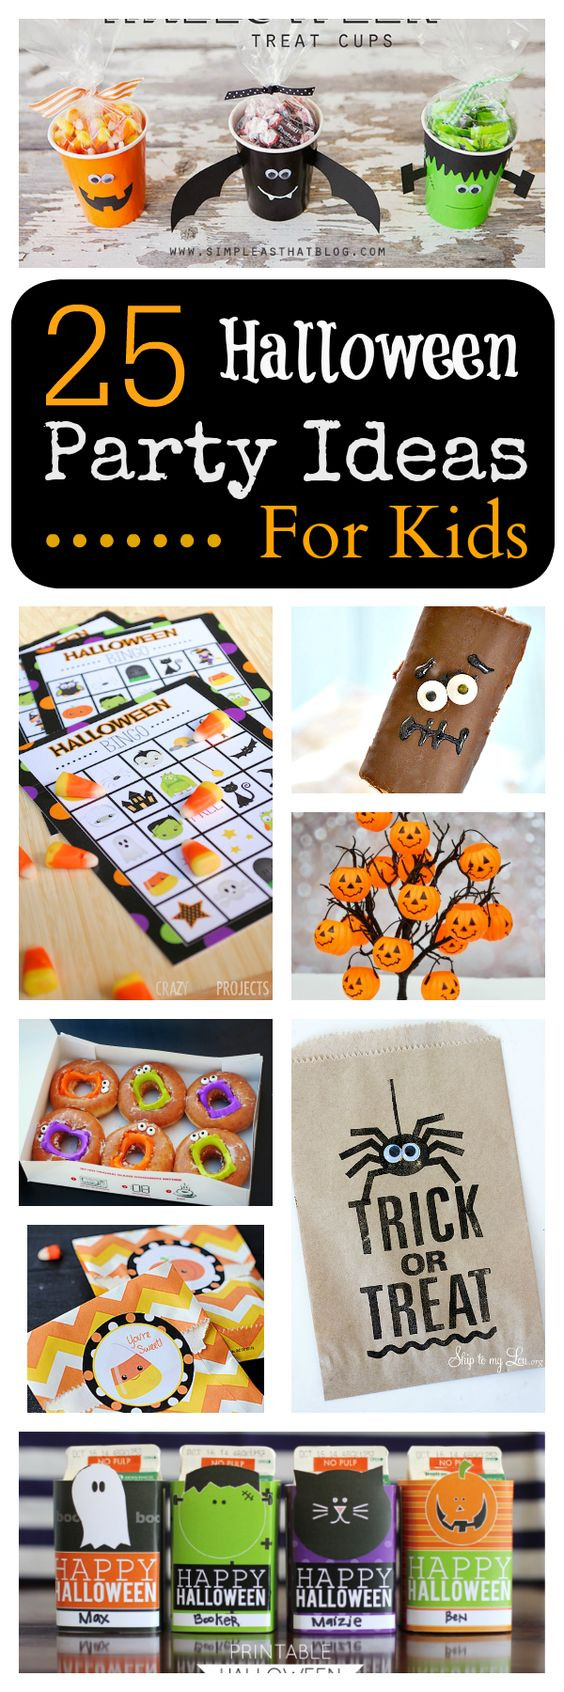 Halloween Party Games Ideas For Teenagers
 25 School Halloween Party Ideas for Kids